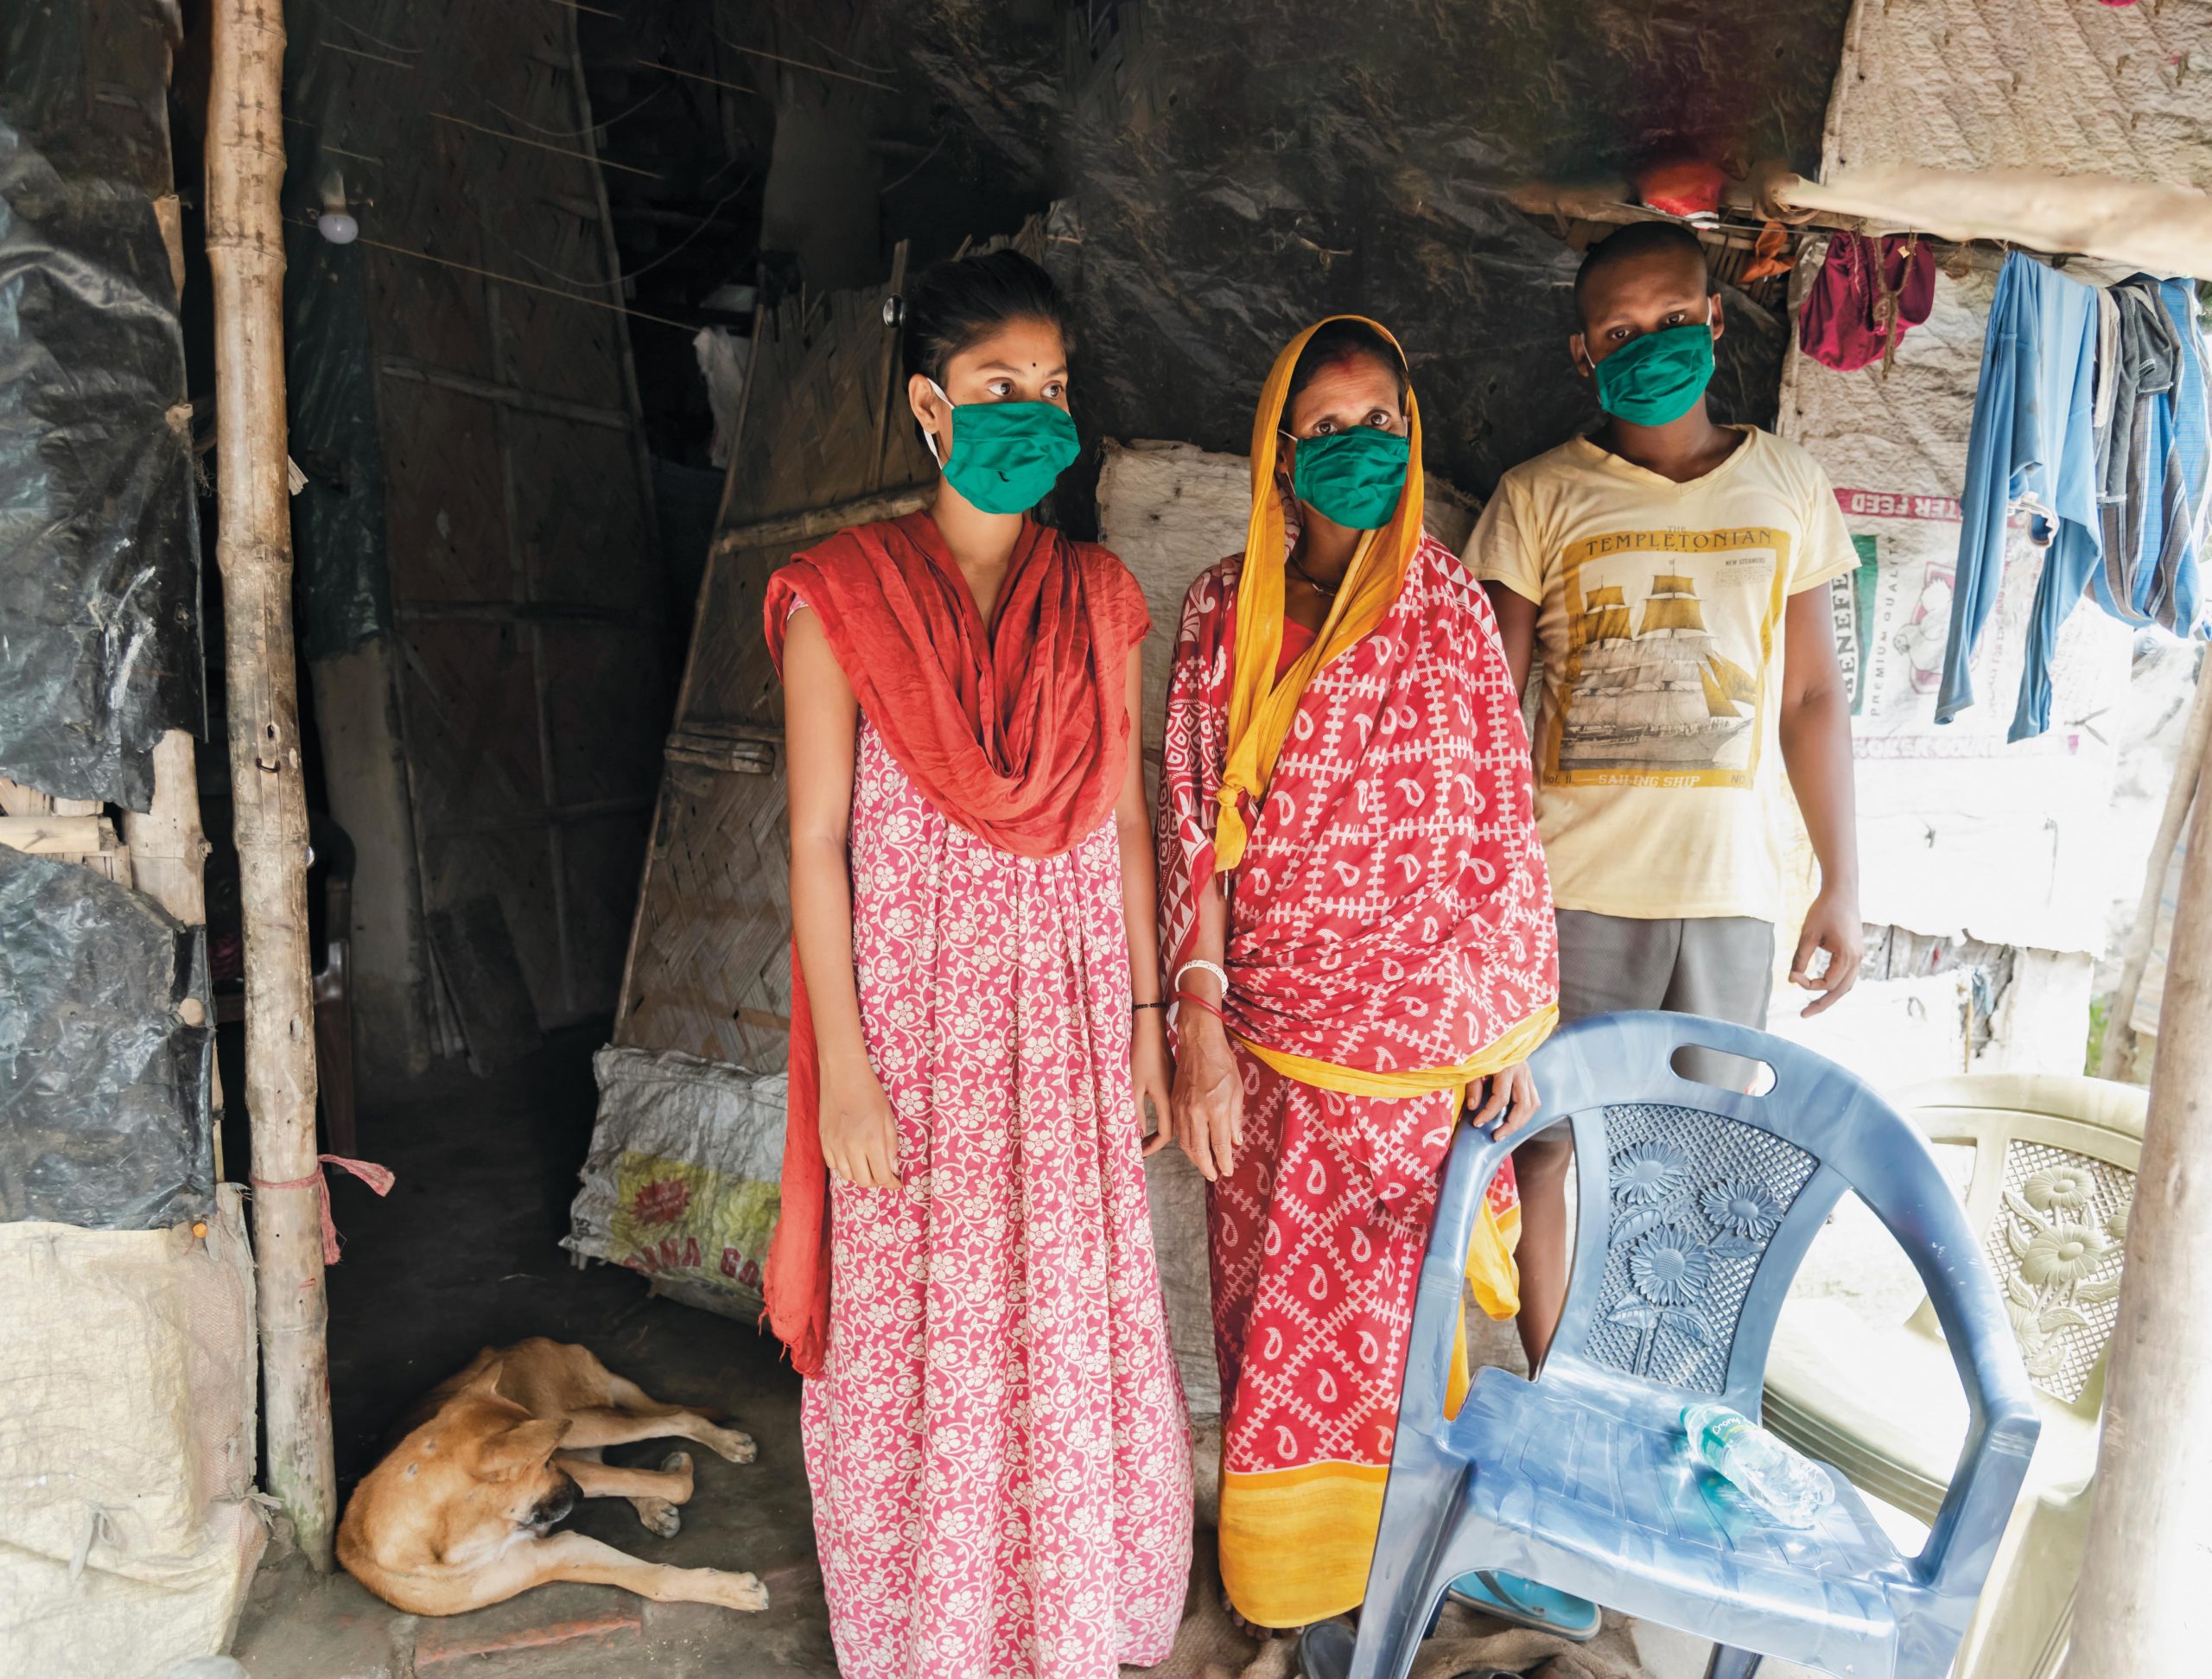 Three women wearing green face masks in India after Super Cyclone Amphan